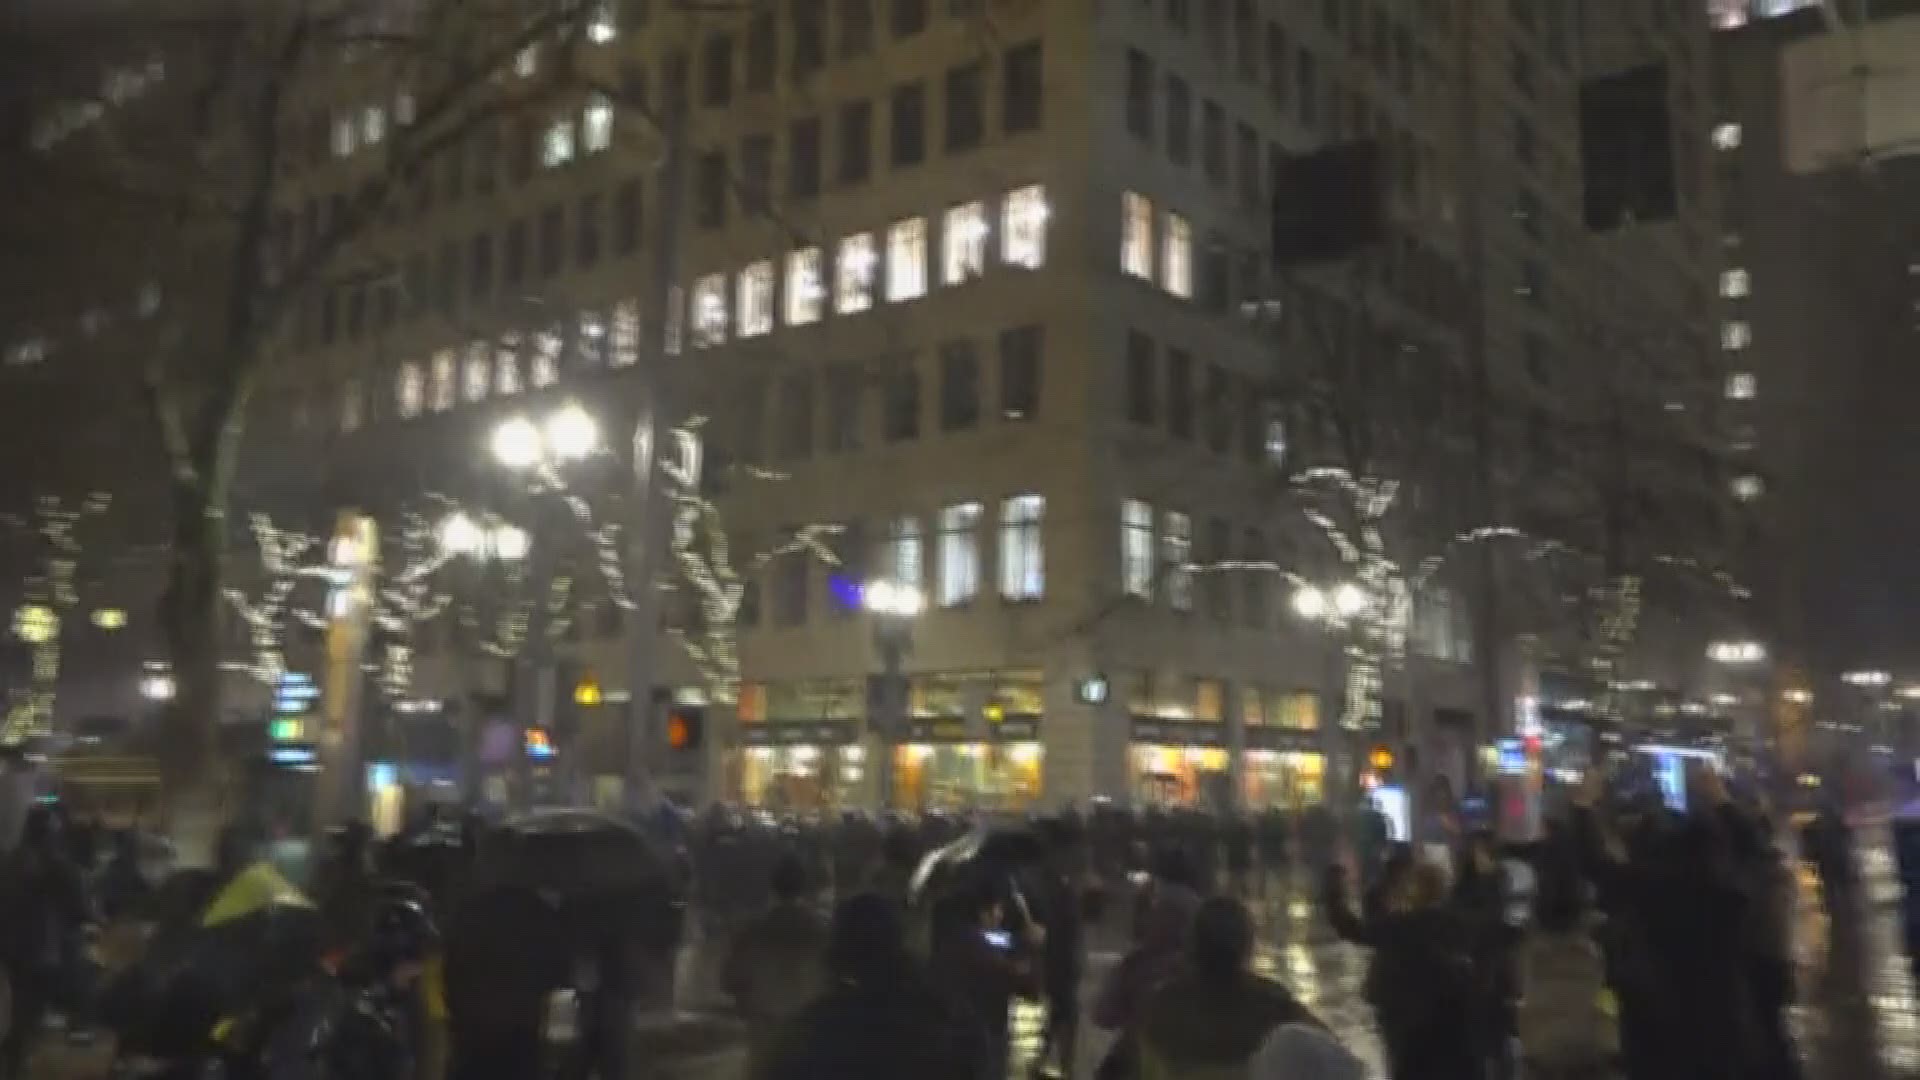 Police deploy flash bangs, gas on protesters